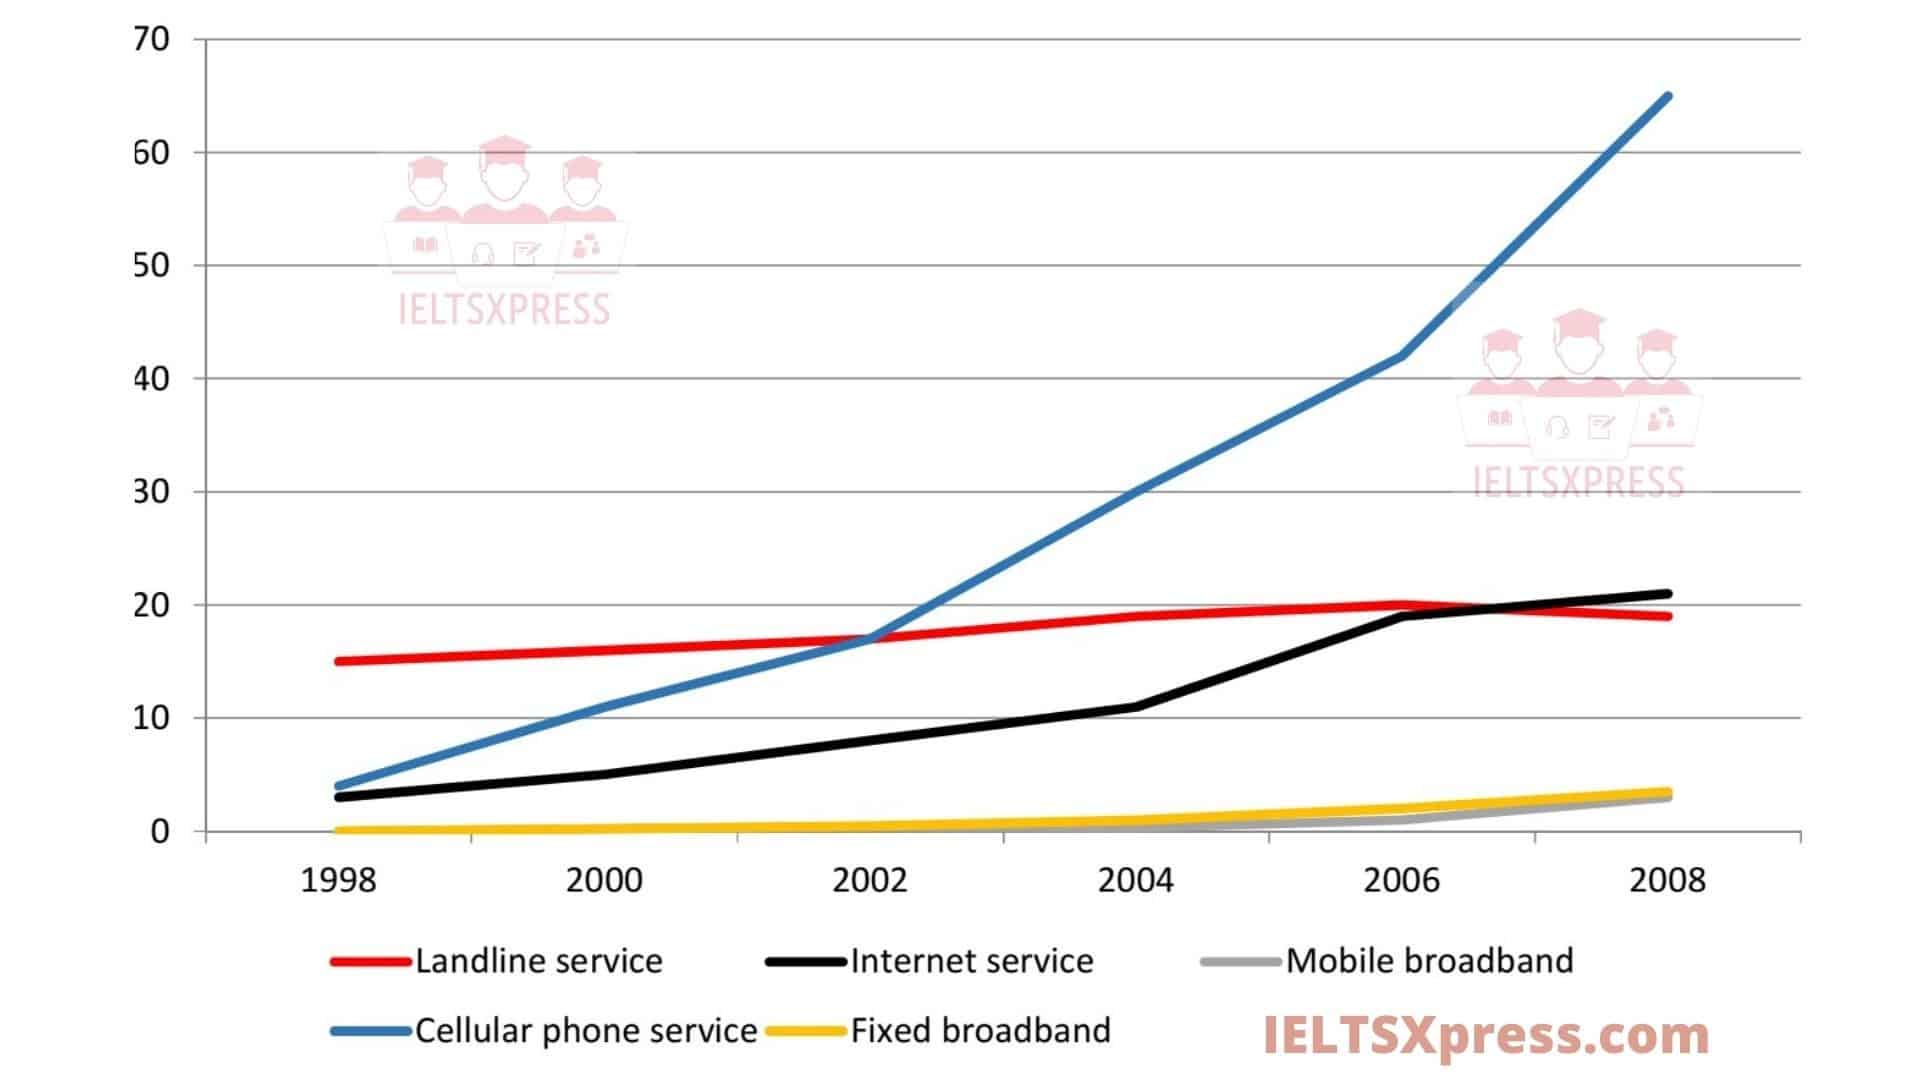 The line graph gives data about the number of users of five different communication services worldwide from 1998 to 2008